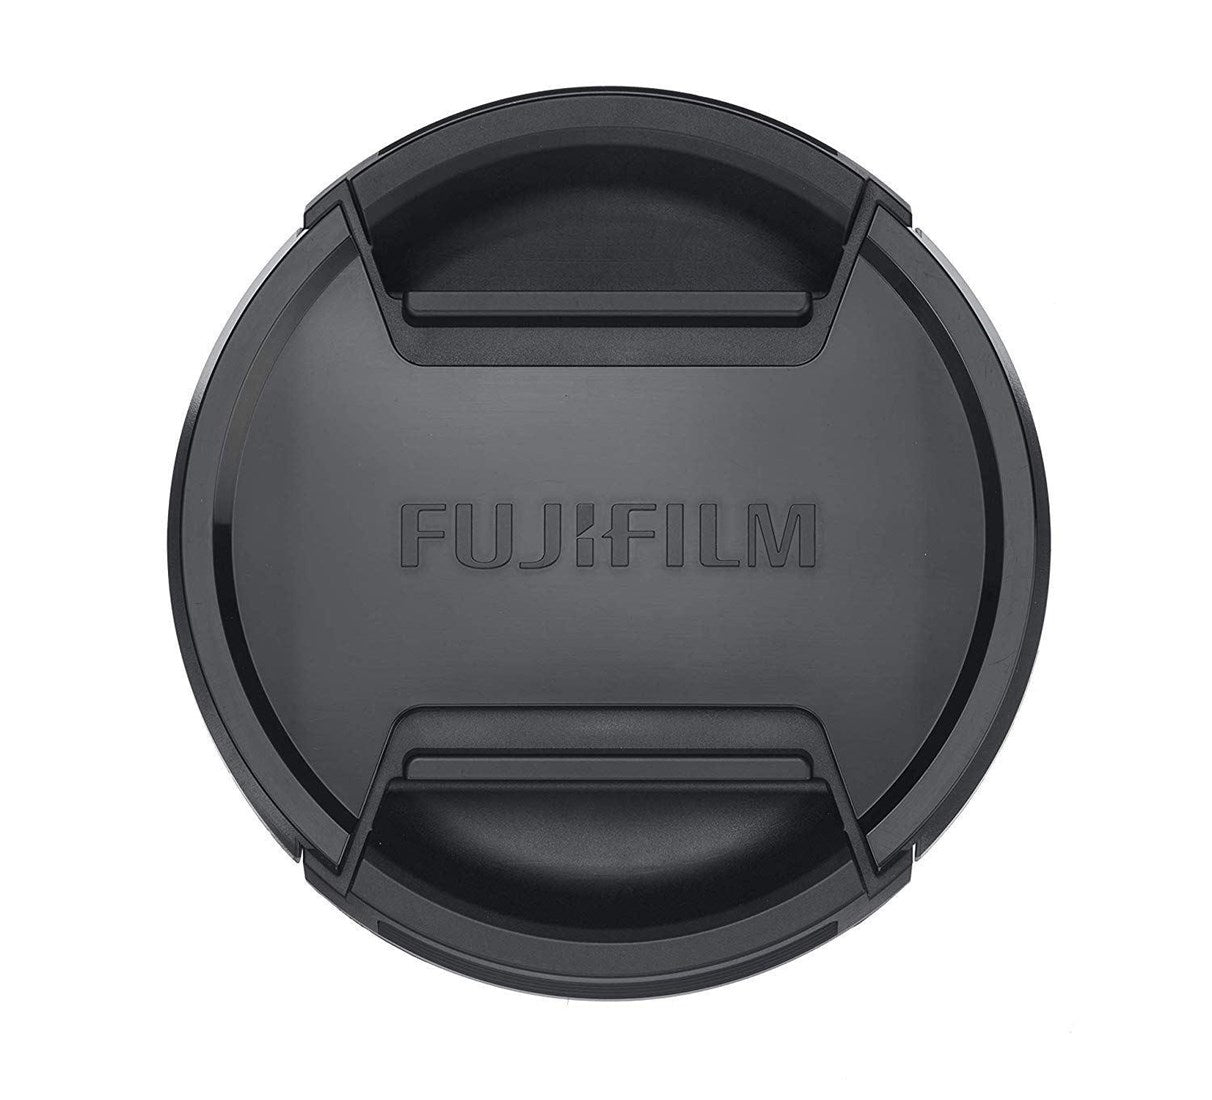 Product Image of FujiFilm 39mm Front Lens Cap for XF27 M mf2.8 and XF60 M mf2.4 R Macro